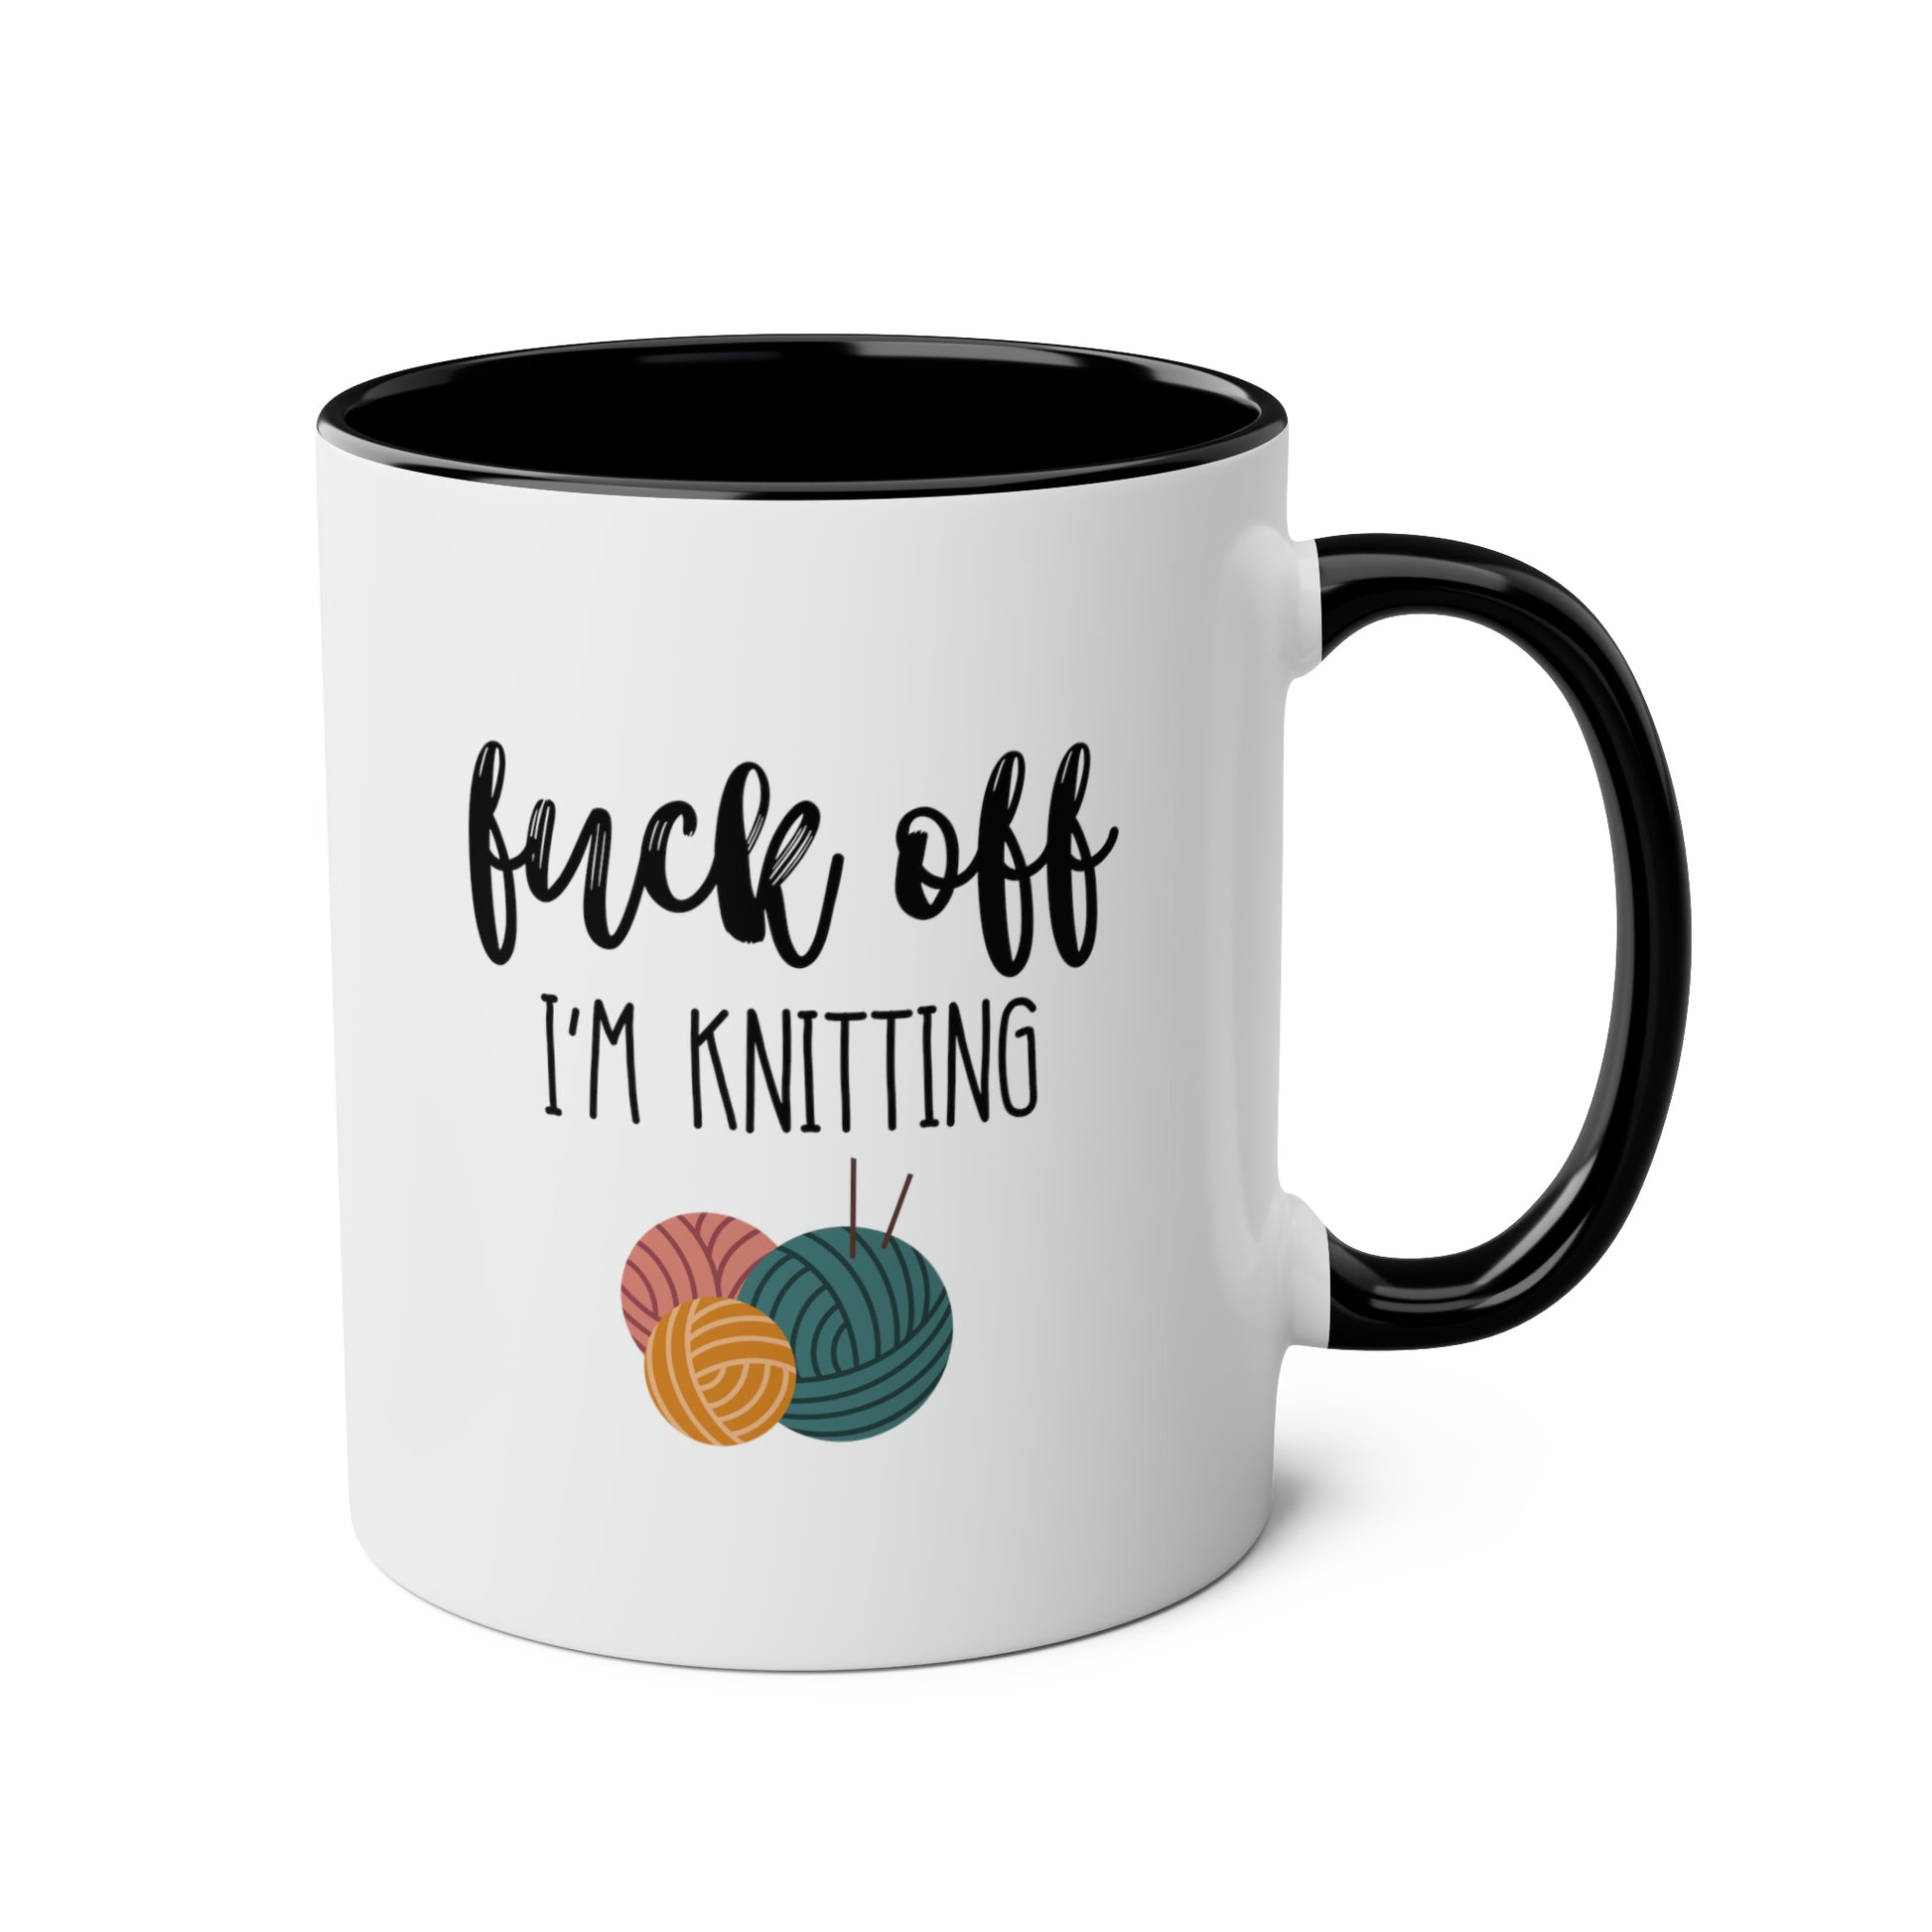 Fuck Off I'm Knitting 11oz white with black accent funny large coffee mug gift for knitters knitting birthday mothers day knit yarn  waveywares wavey wares wavywares wavy wares